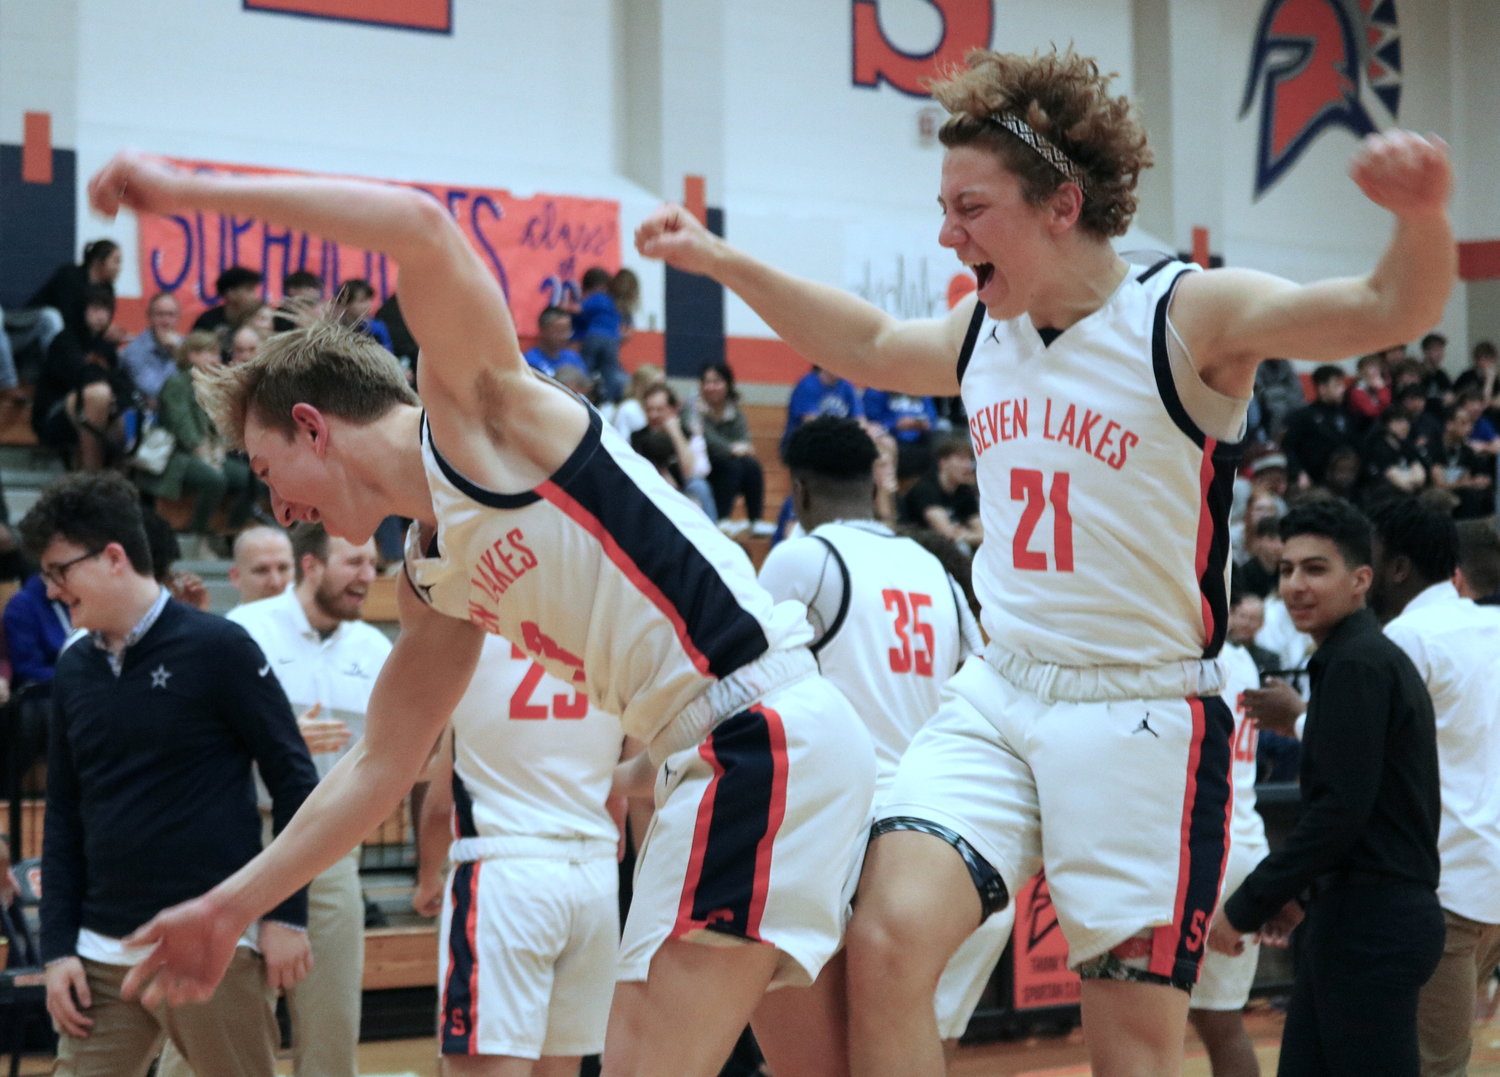 Noah Simiskey and Luke Simank celebrate after Seven Lakes clinched an outright district title with a win over Taylor on Wednesday at the Seven Lakes gym.